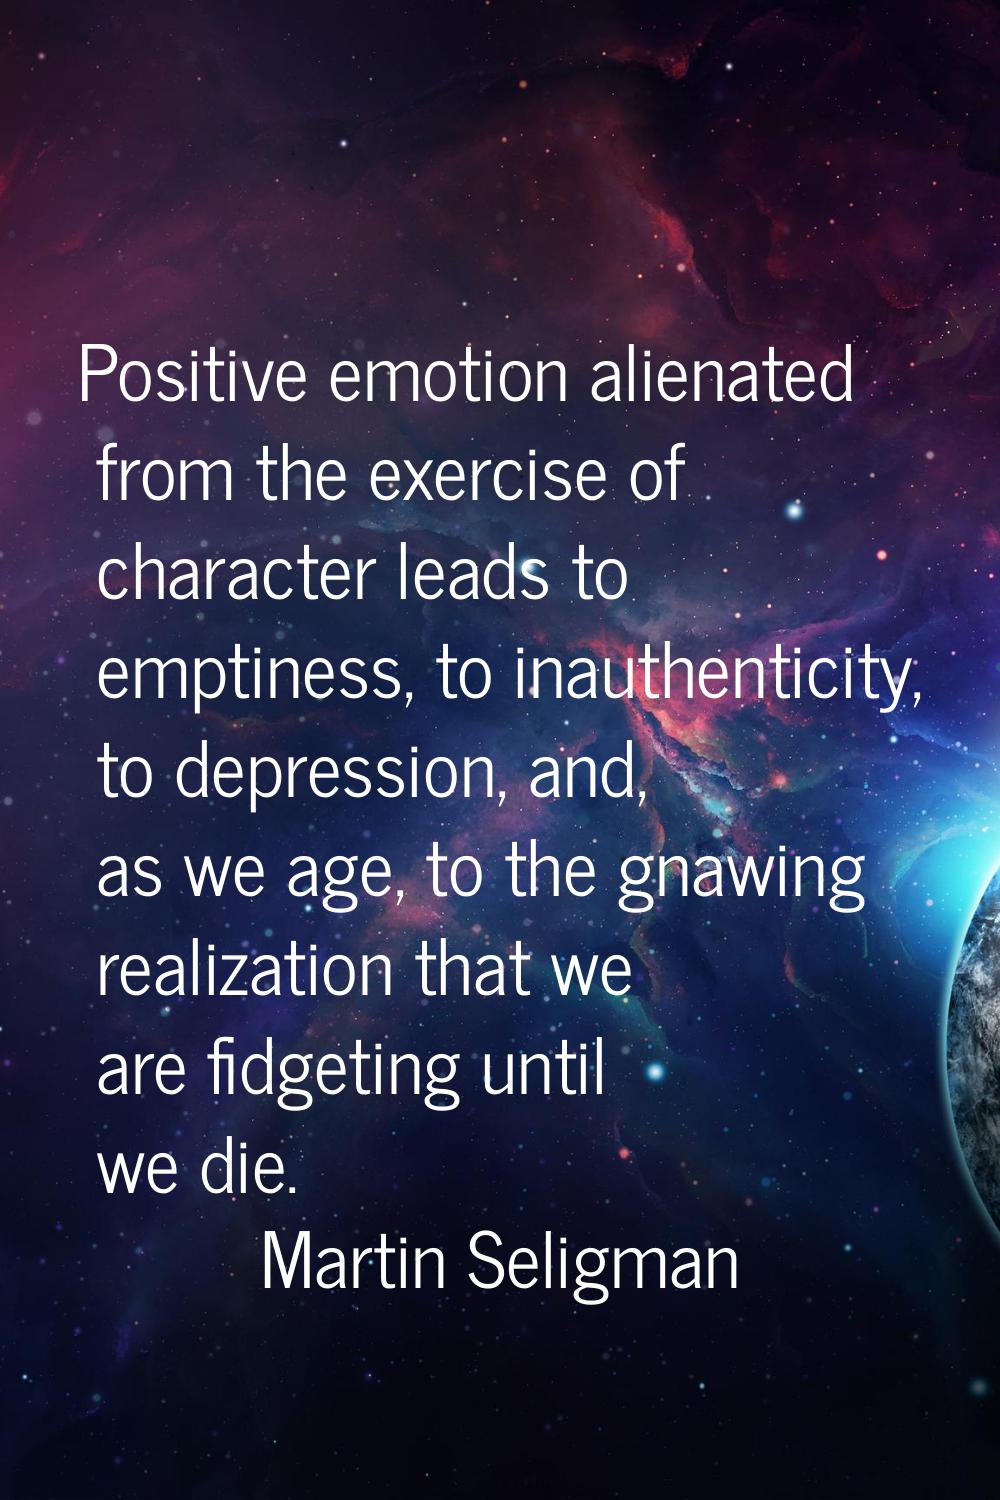 Positive emotion alienated from the exercise of character leads to emptiness, to inauthenticity, to